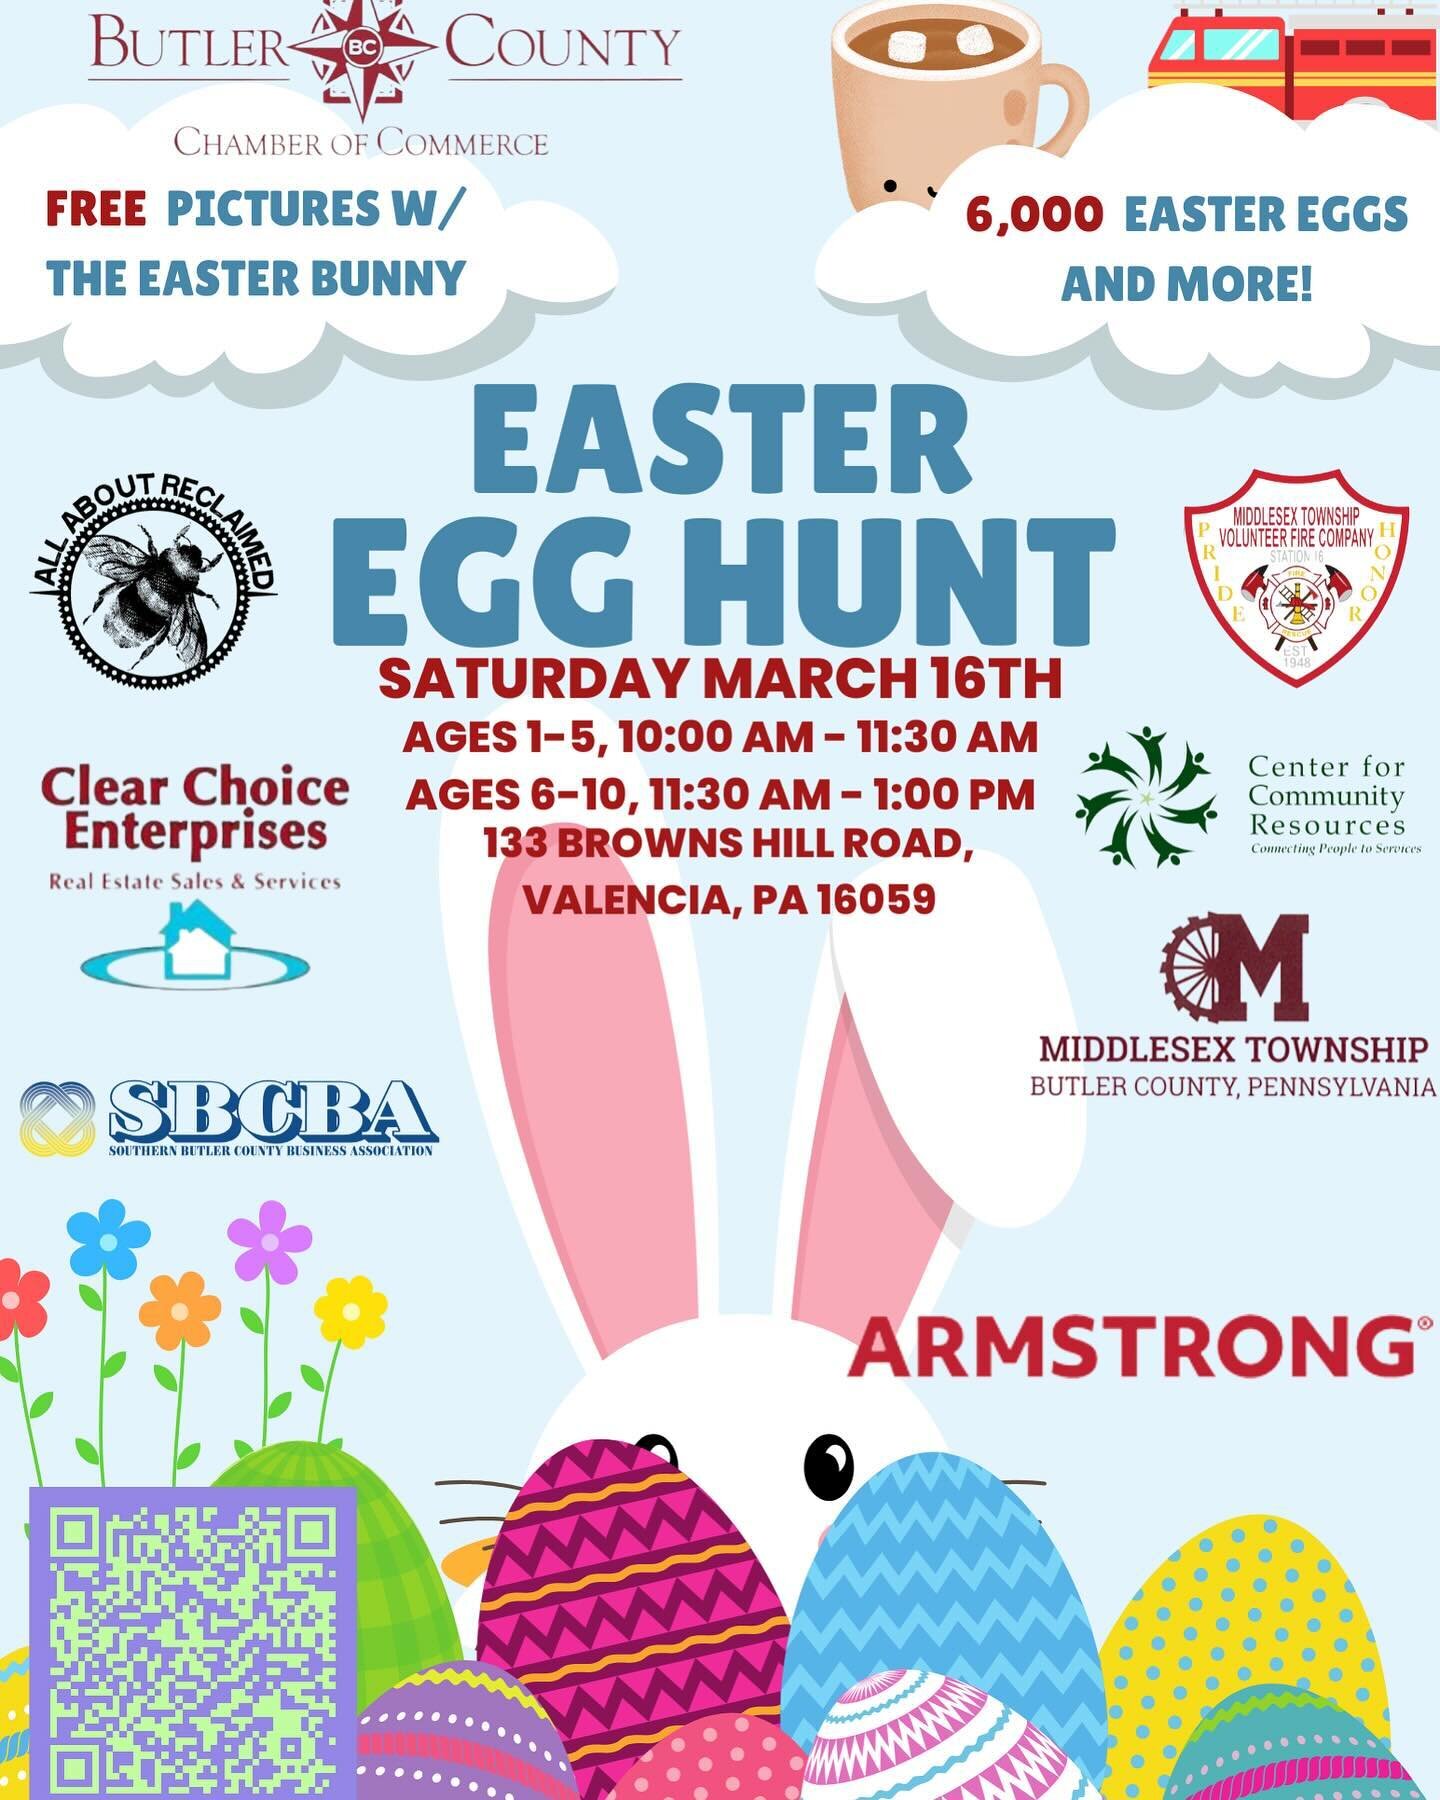 Join us and the Butler Chamber of Commerce @lovebutlercountypa this Saturday, March 16th for an egg-citing Easter Egg Hunt in Middlesex Township! 🐣🌷 Bring your family and hop into the spring spirit with a day of fun and festivities. See you there! 